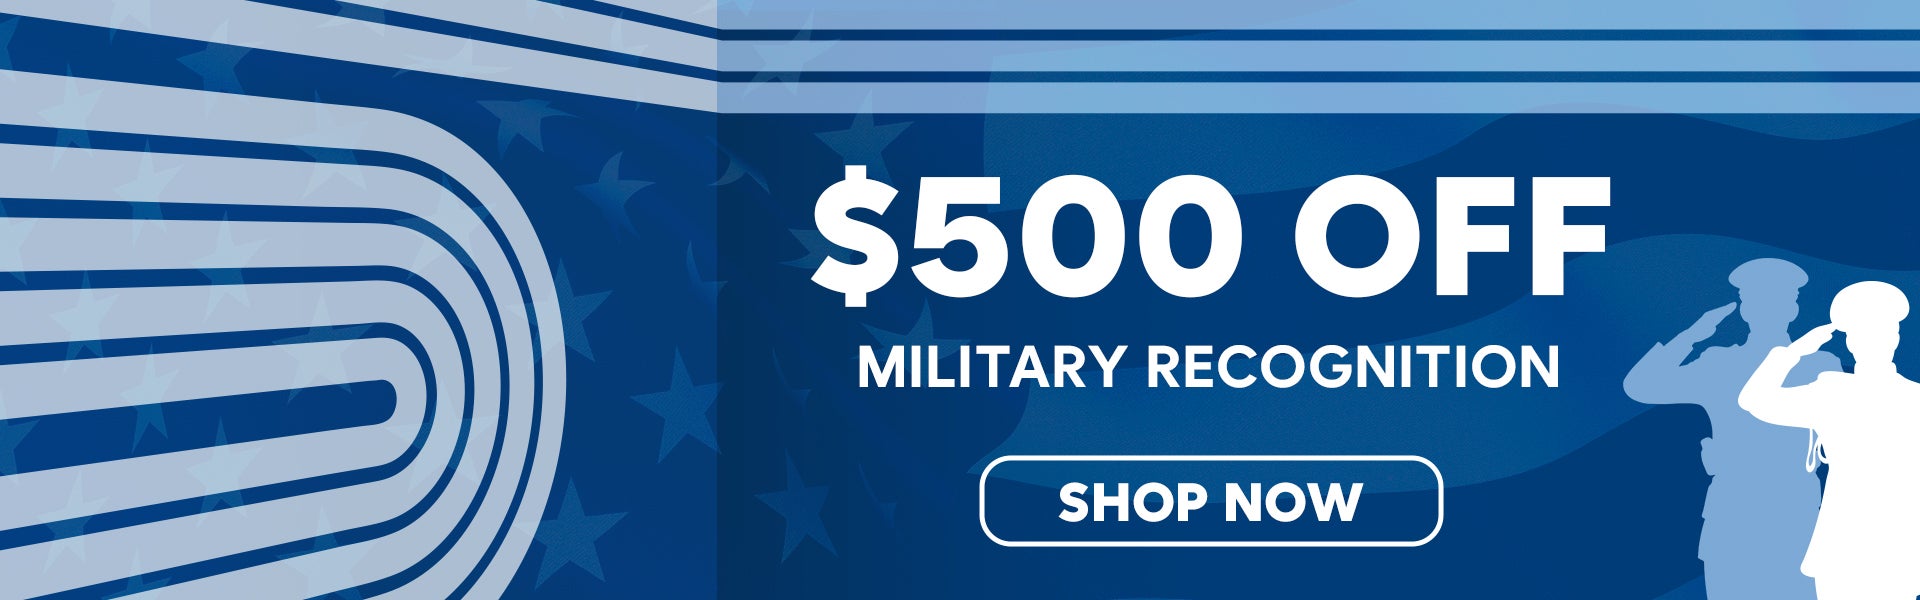 $500 Off Military Recognition